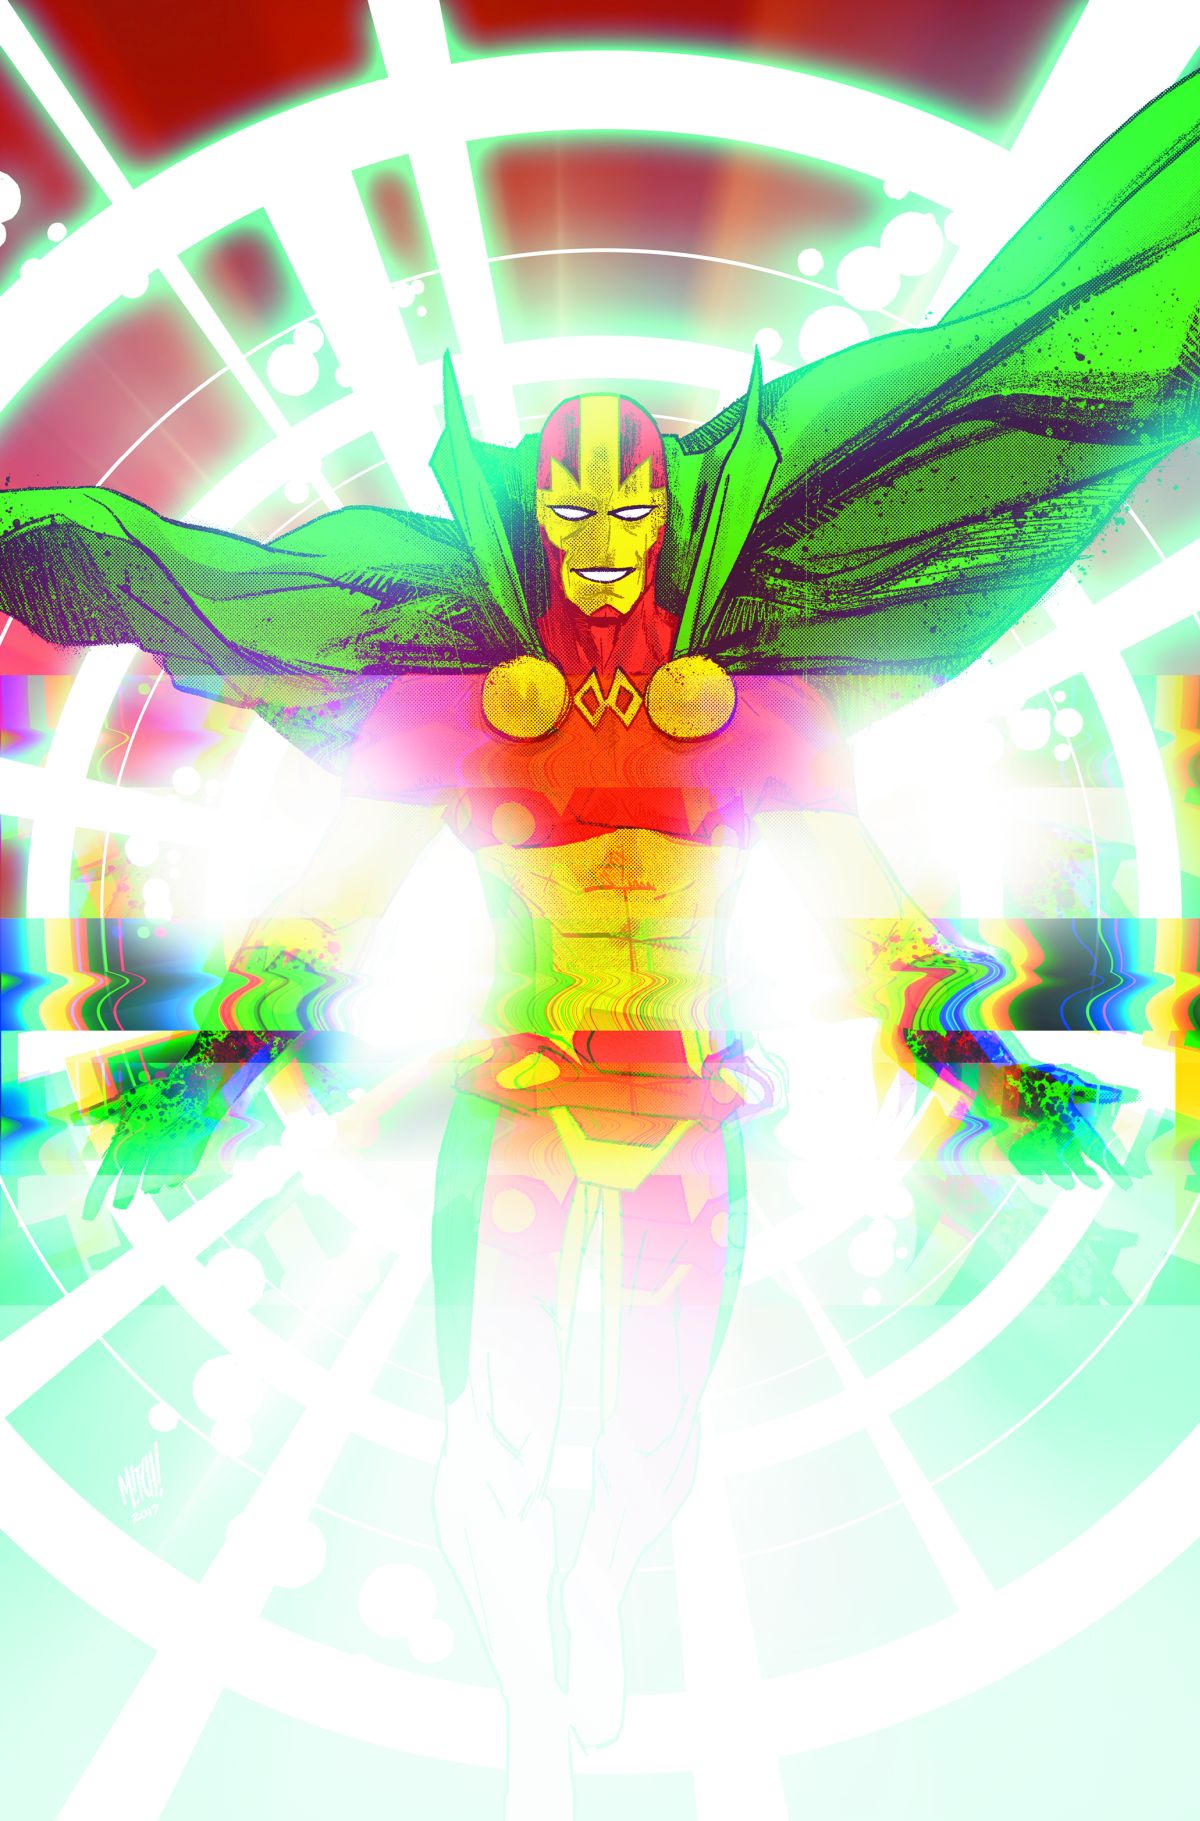 MISTER MIRACLE TP 